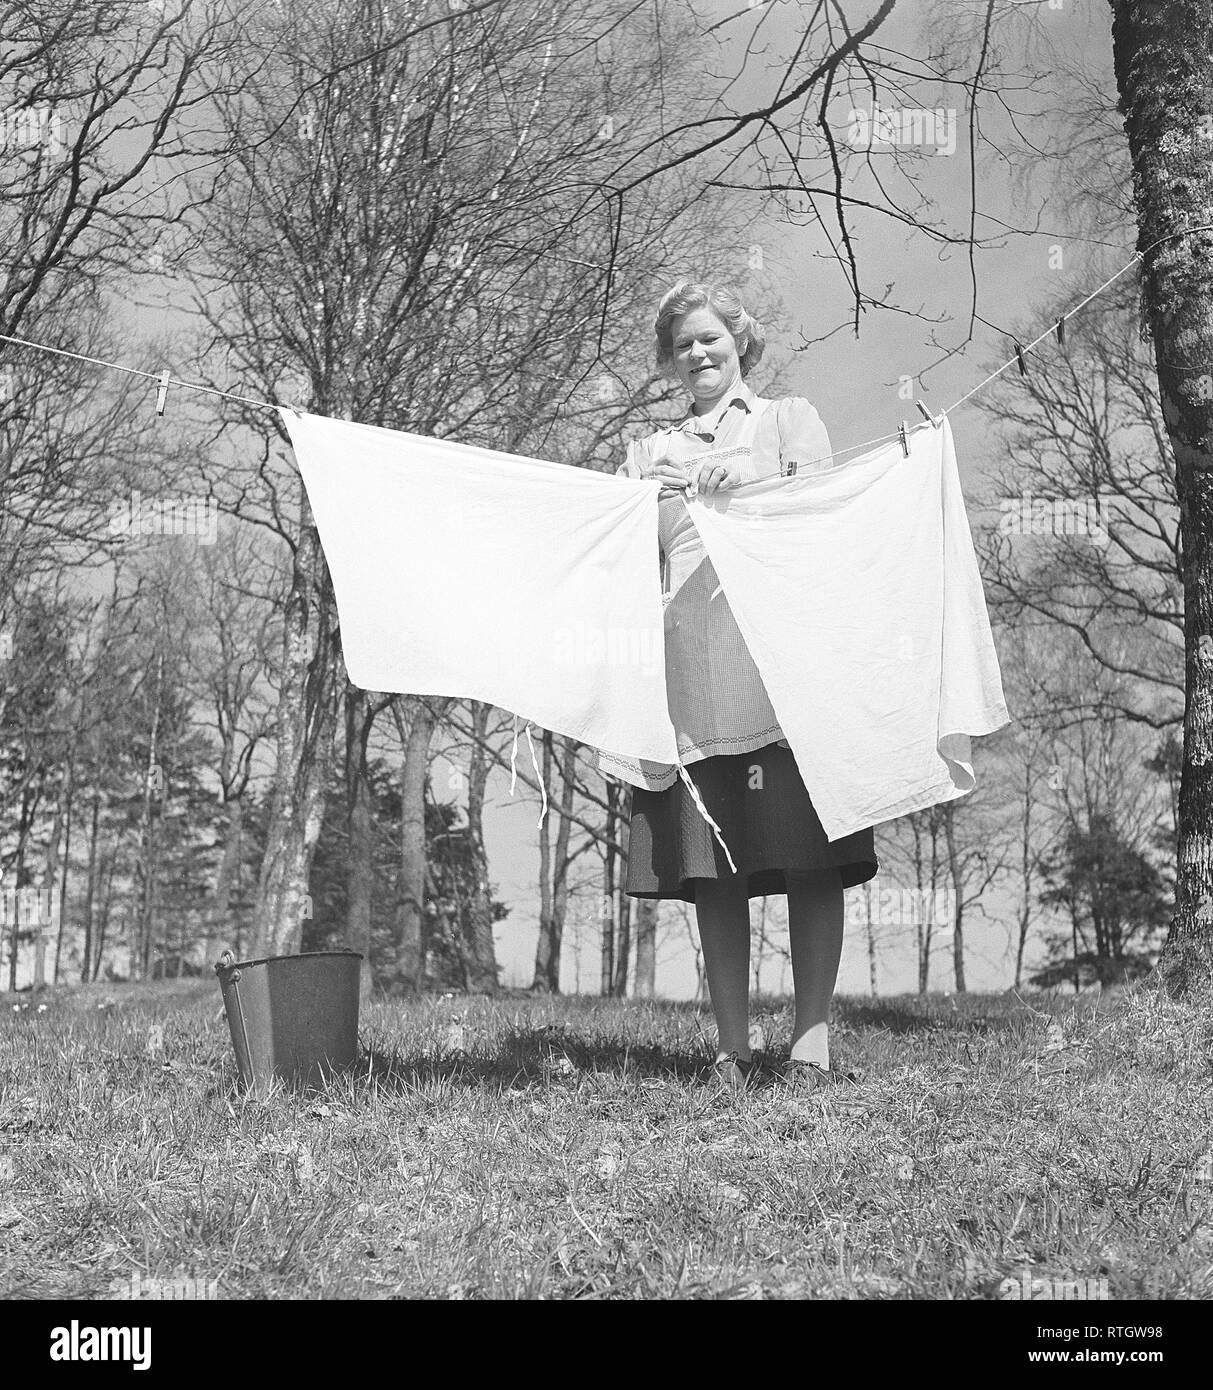 Doing the laundry in the 1950s. A lady is out in the garden hanging up the laundry to dry. Photo Kristoffersson ref BC7-8. Sweden 1951 Stock Photo